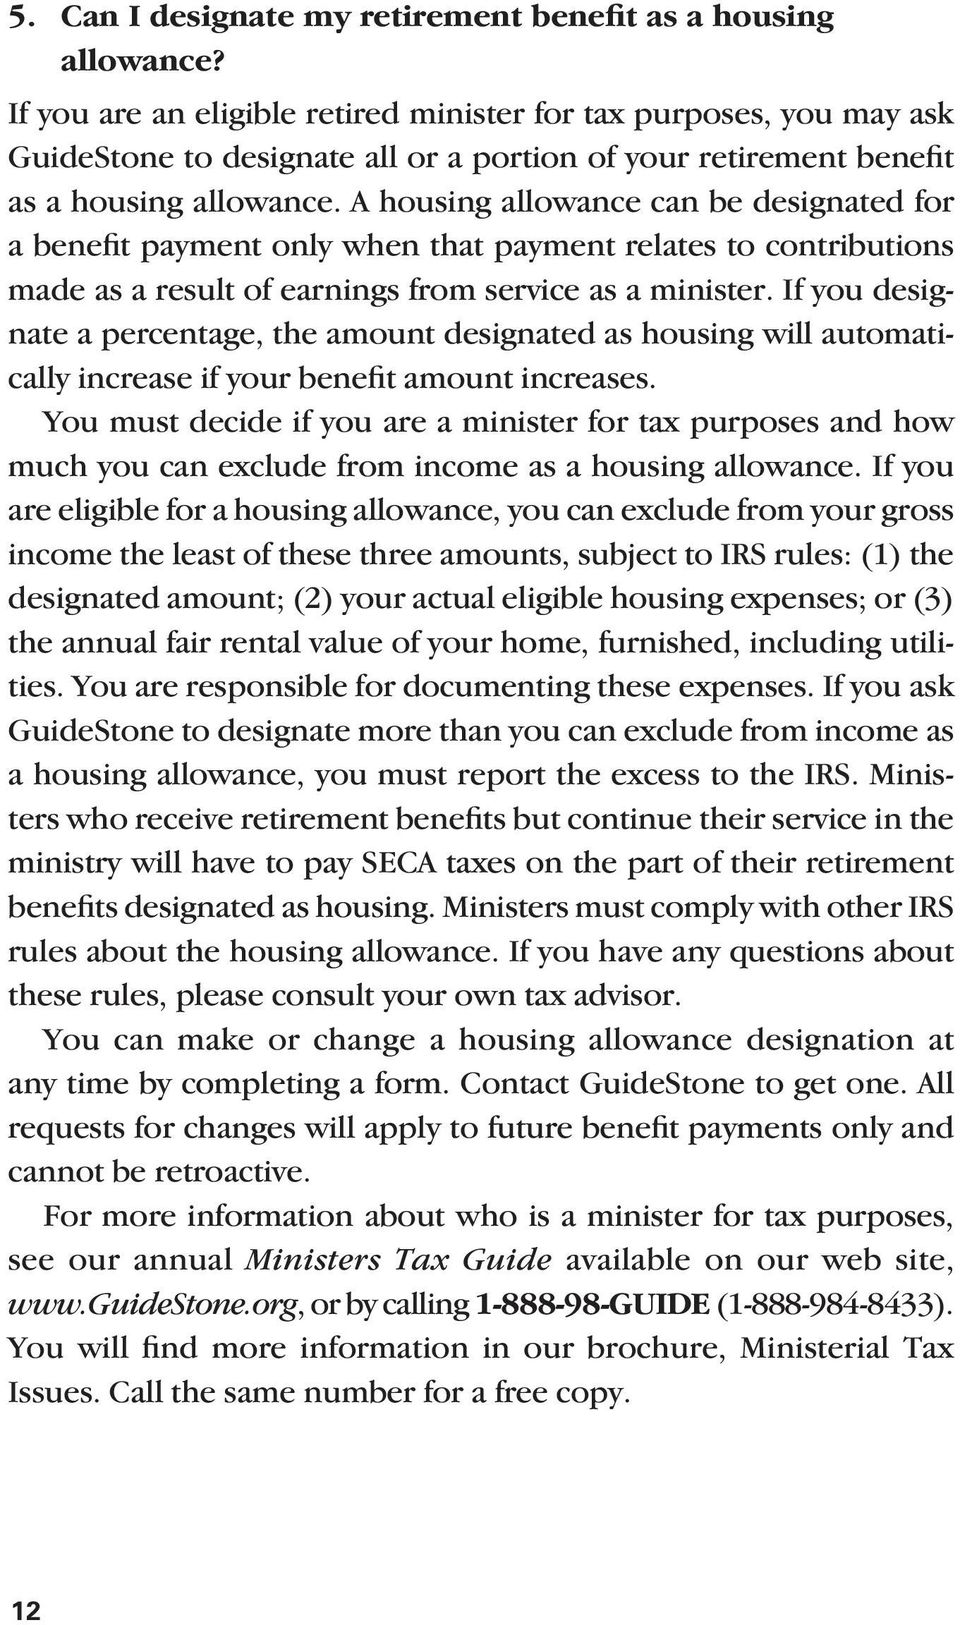 A housing allowance can be designated for a benefit payment only when that payment relates to contributions made as a result of earnings from service as a minister.